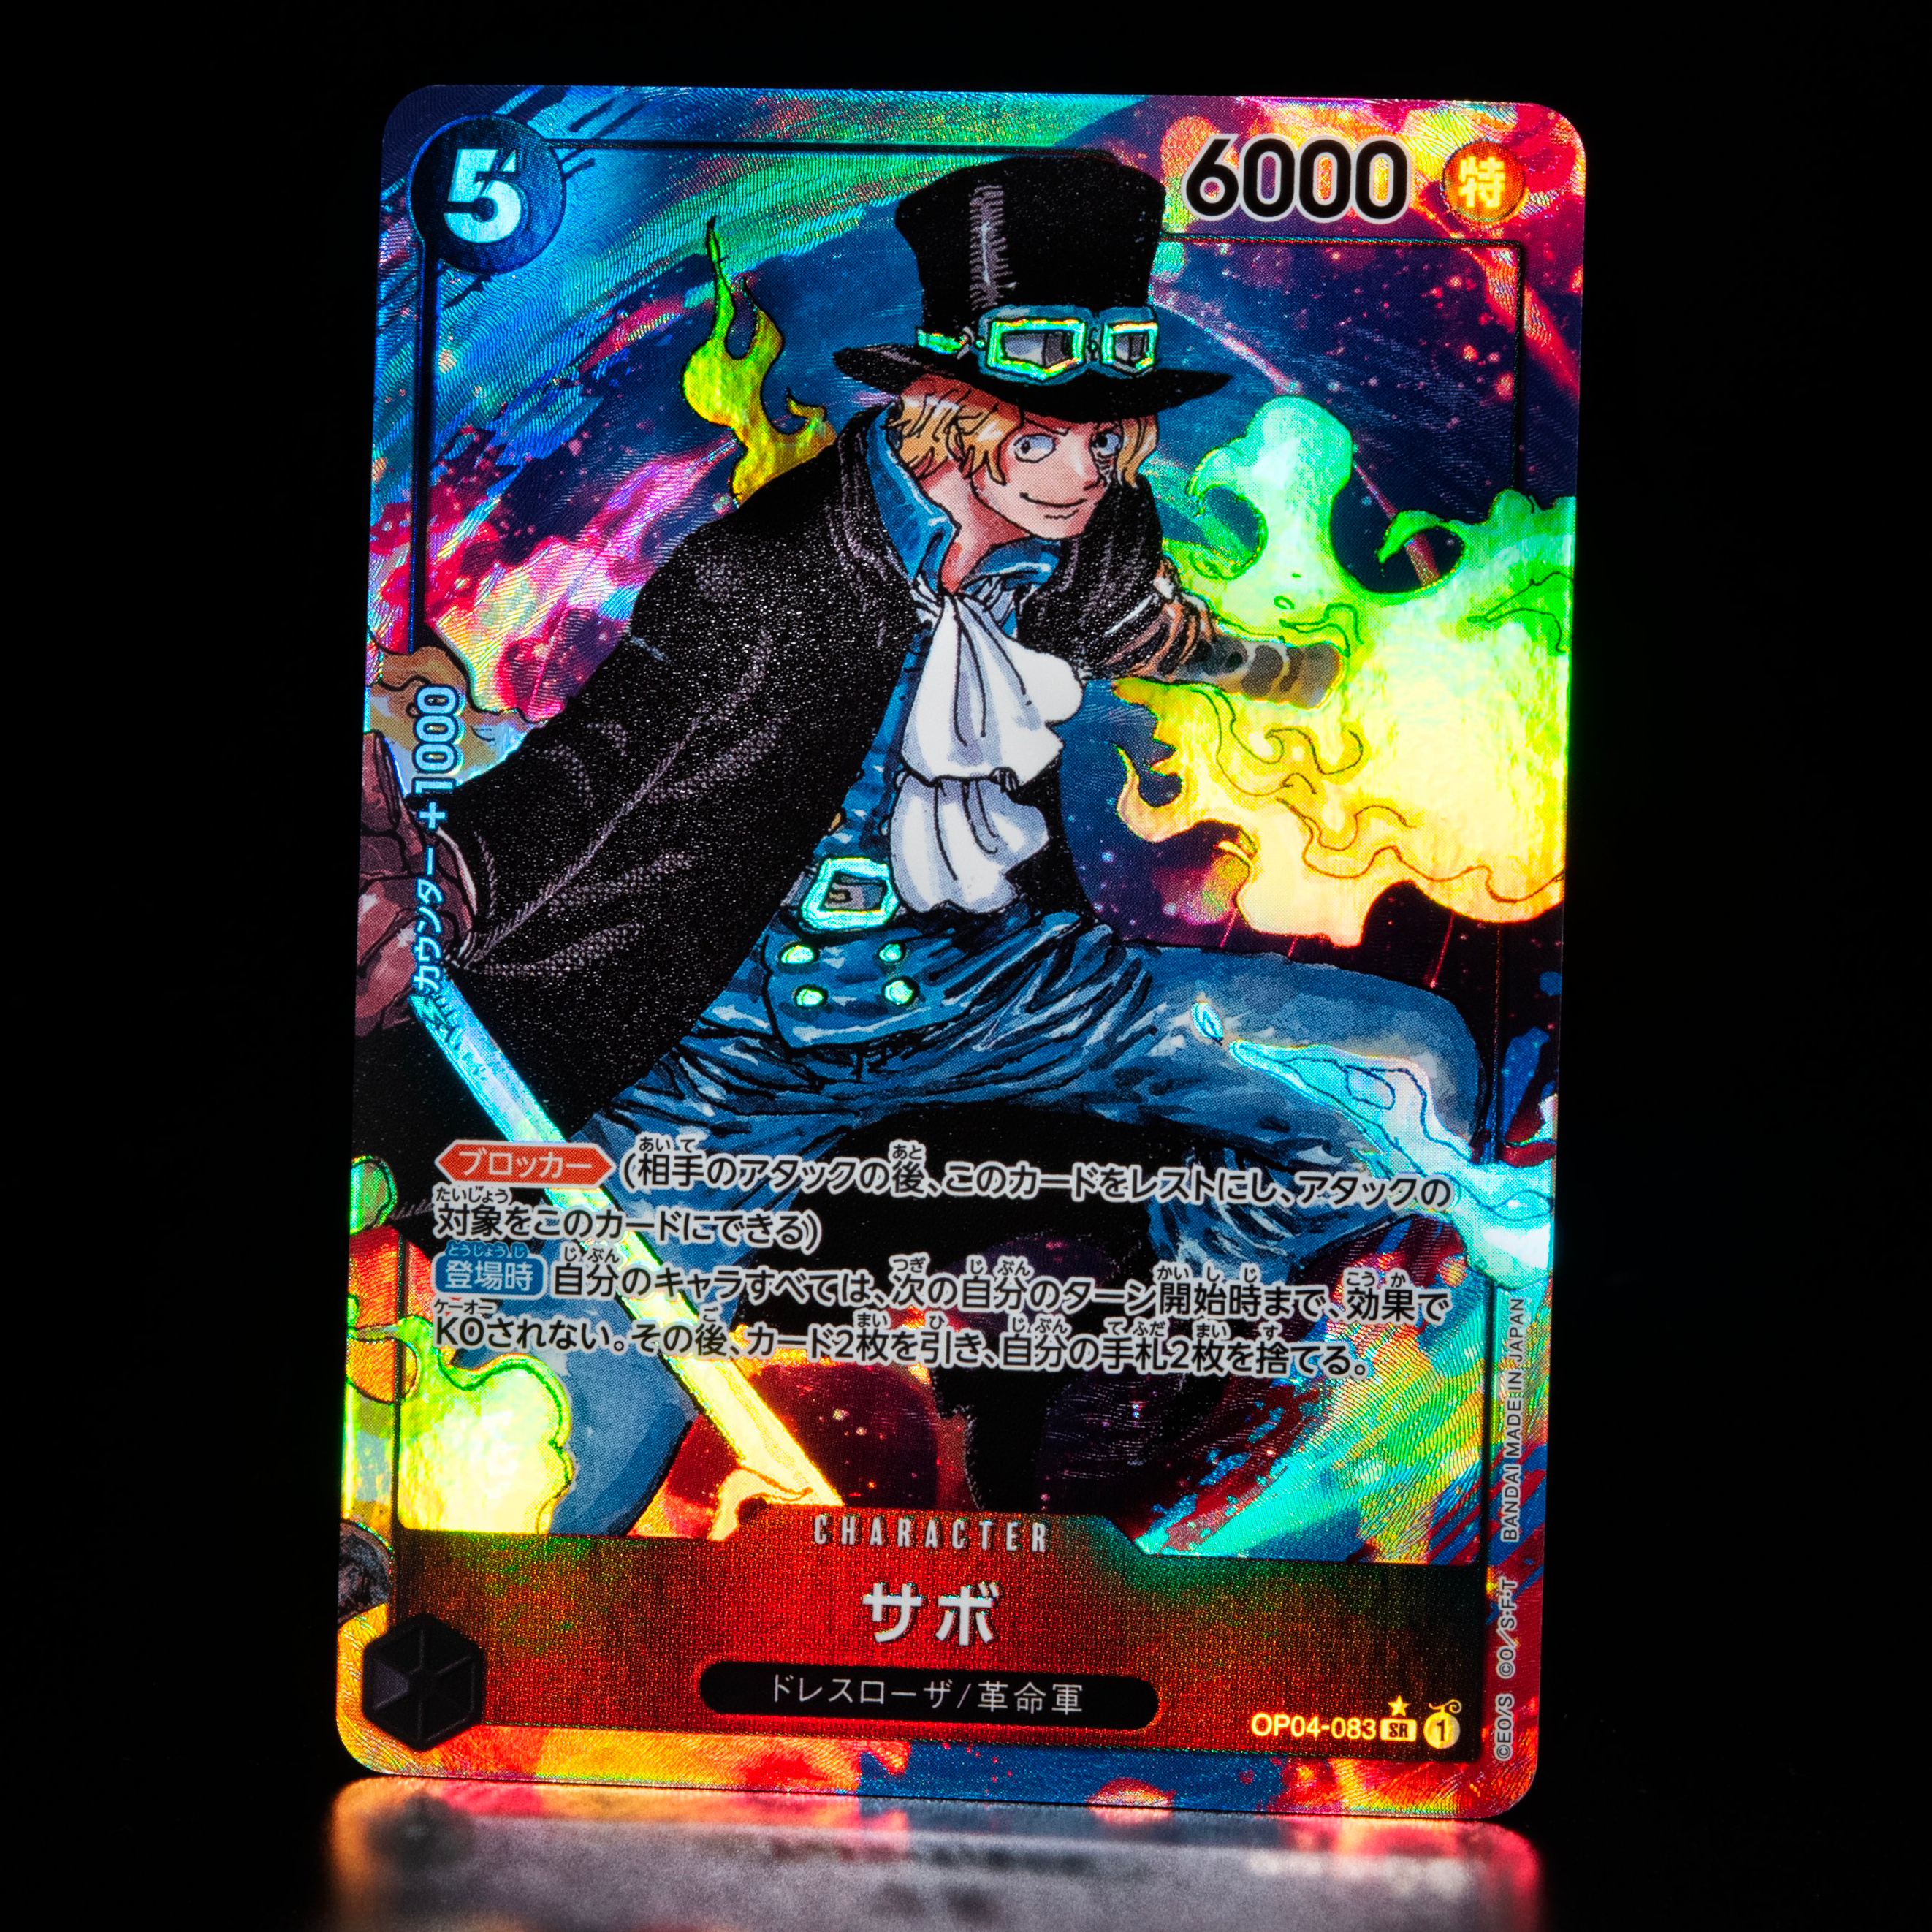 ONE PIECE CARD GAME ｢Kingdoms of Intrigue｣  ONE PIECE CARD GAME OP04-083 Super Rare Parallel card  Sabo